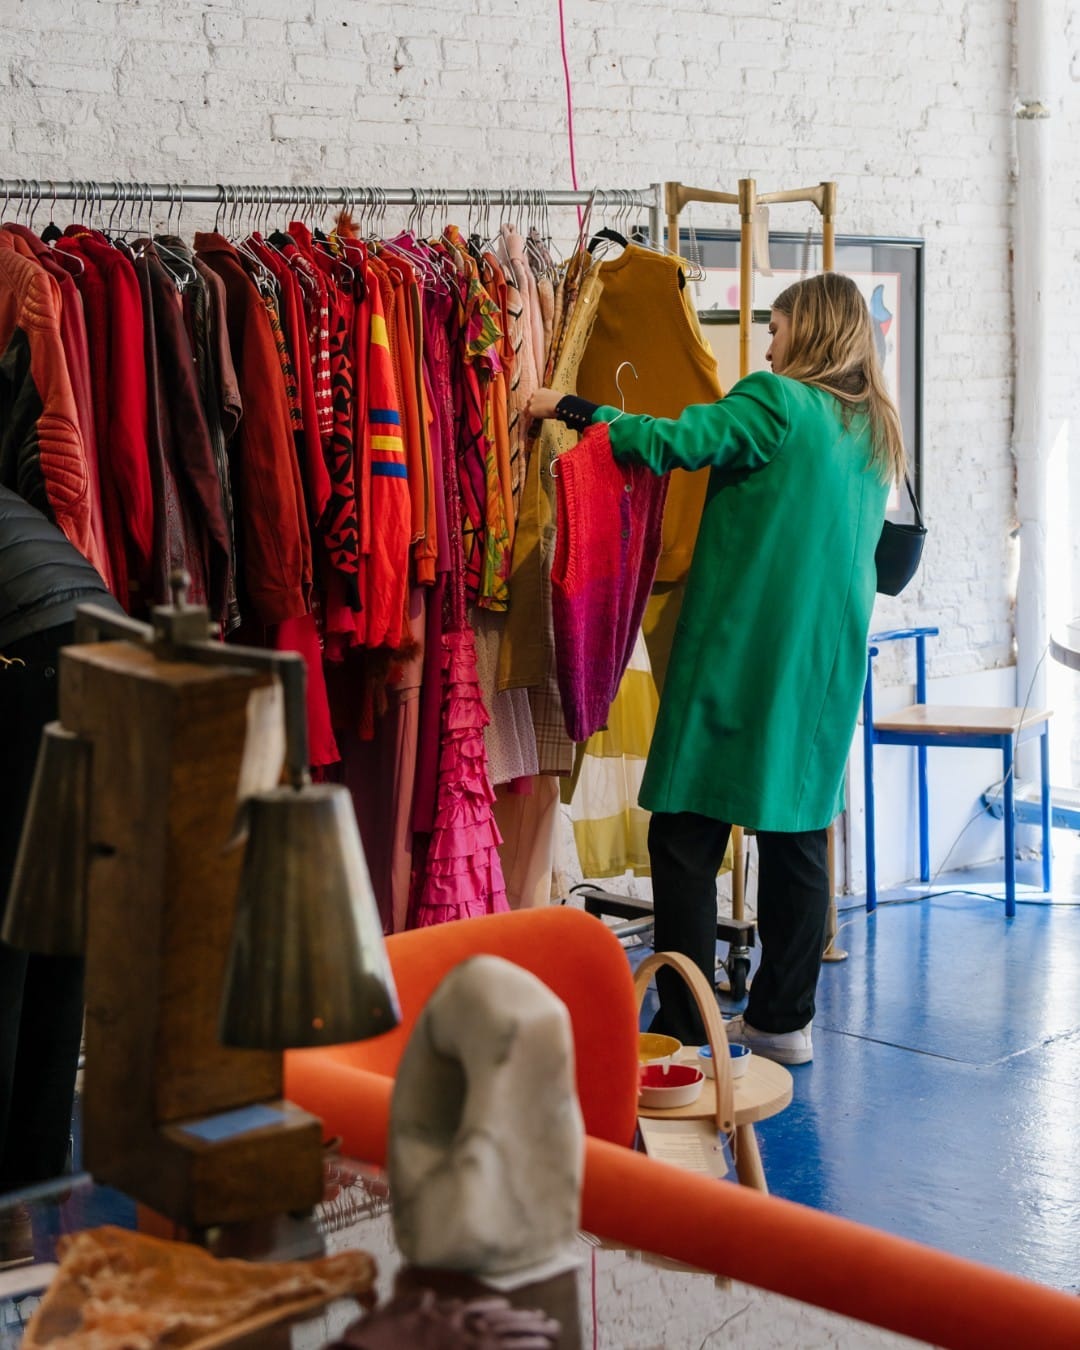 Fridays are for thrifting. Indulge in a bright wardrobe refresh or new home decor at @clubvintage. Open Tues-Sun ➤ 11am – 7pm #TheSeaport